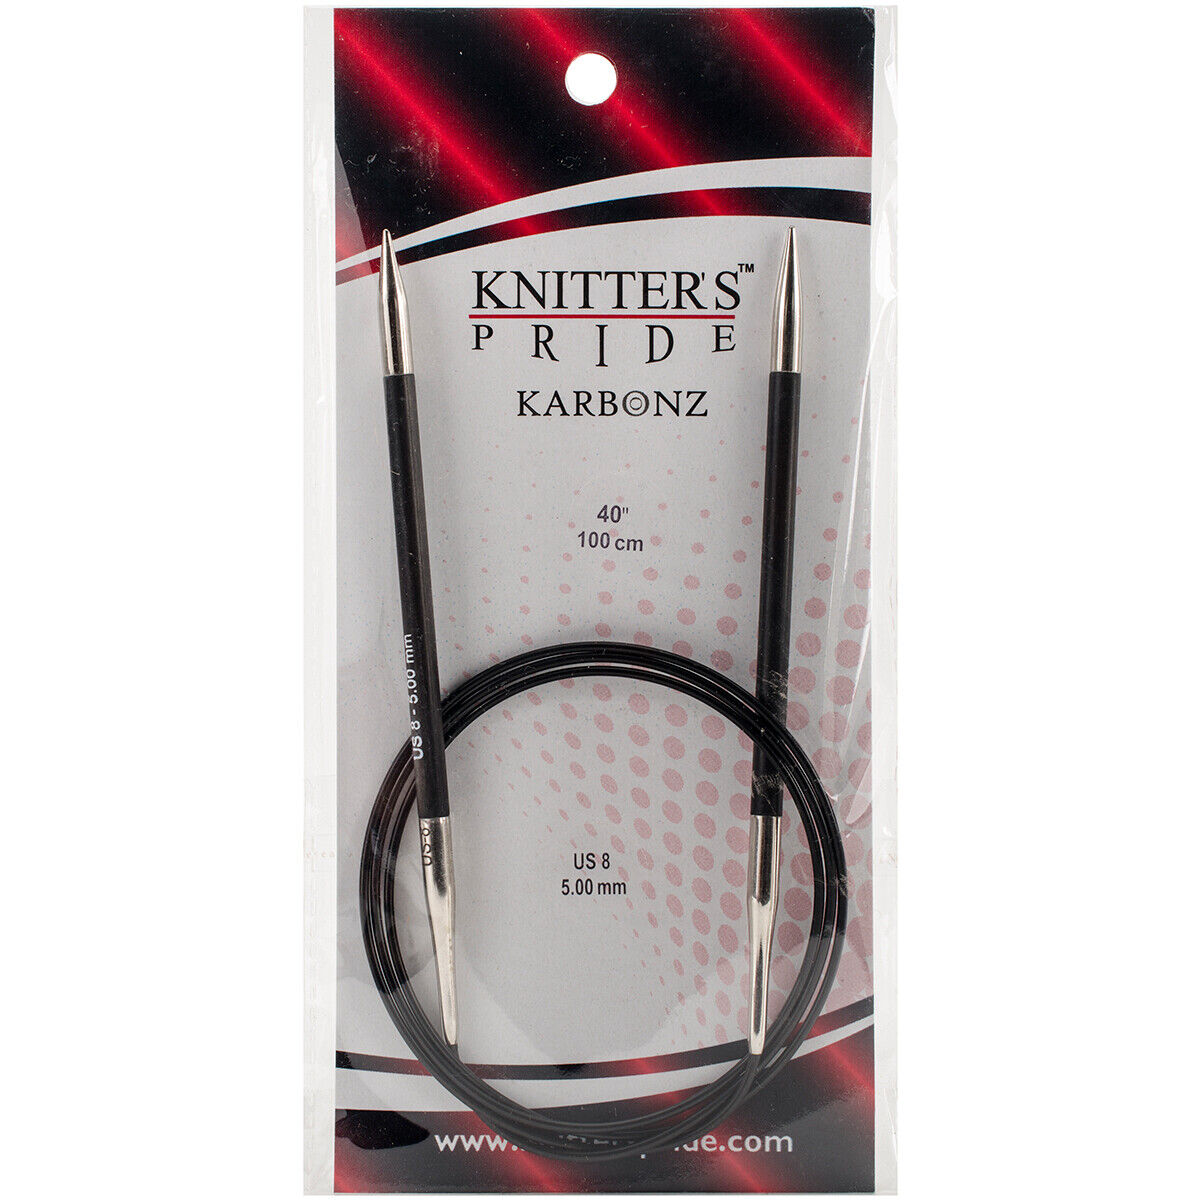 Knitter's Pride-karbonz Fixed Circular Needles 40"-size 8/5mm